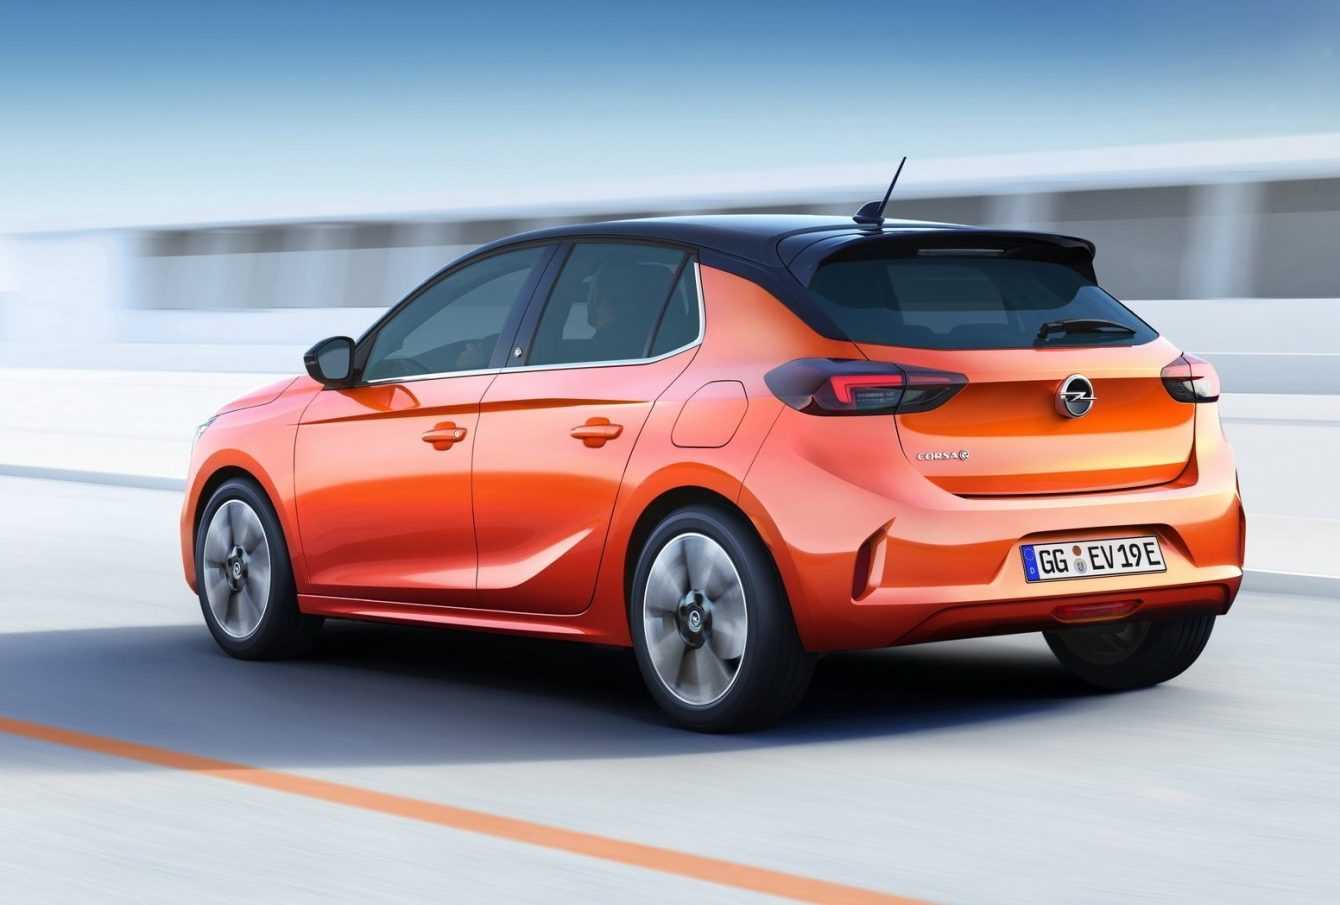 Opel Corsa: is the new generation on the way?